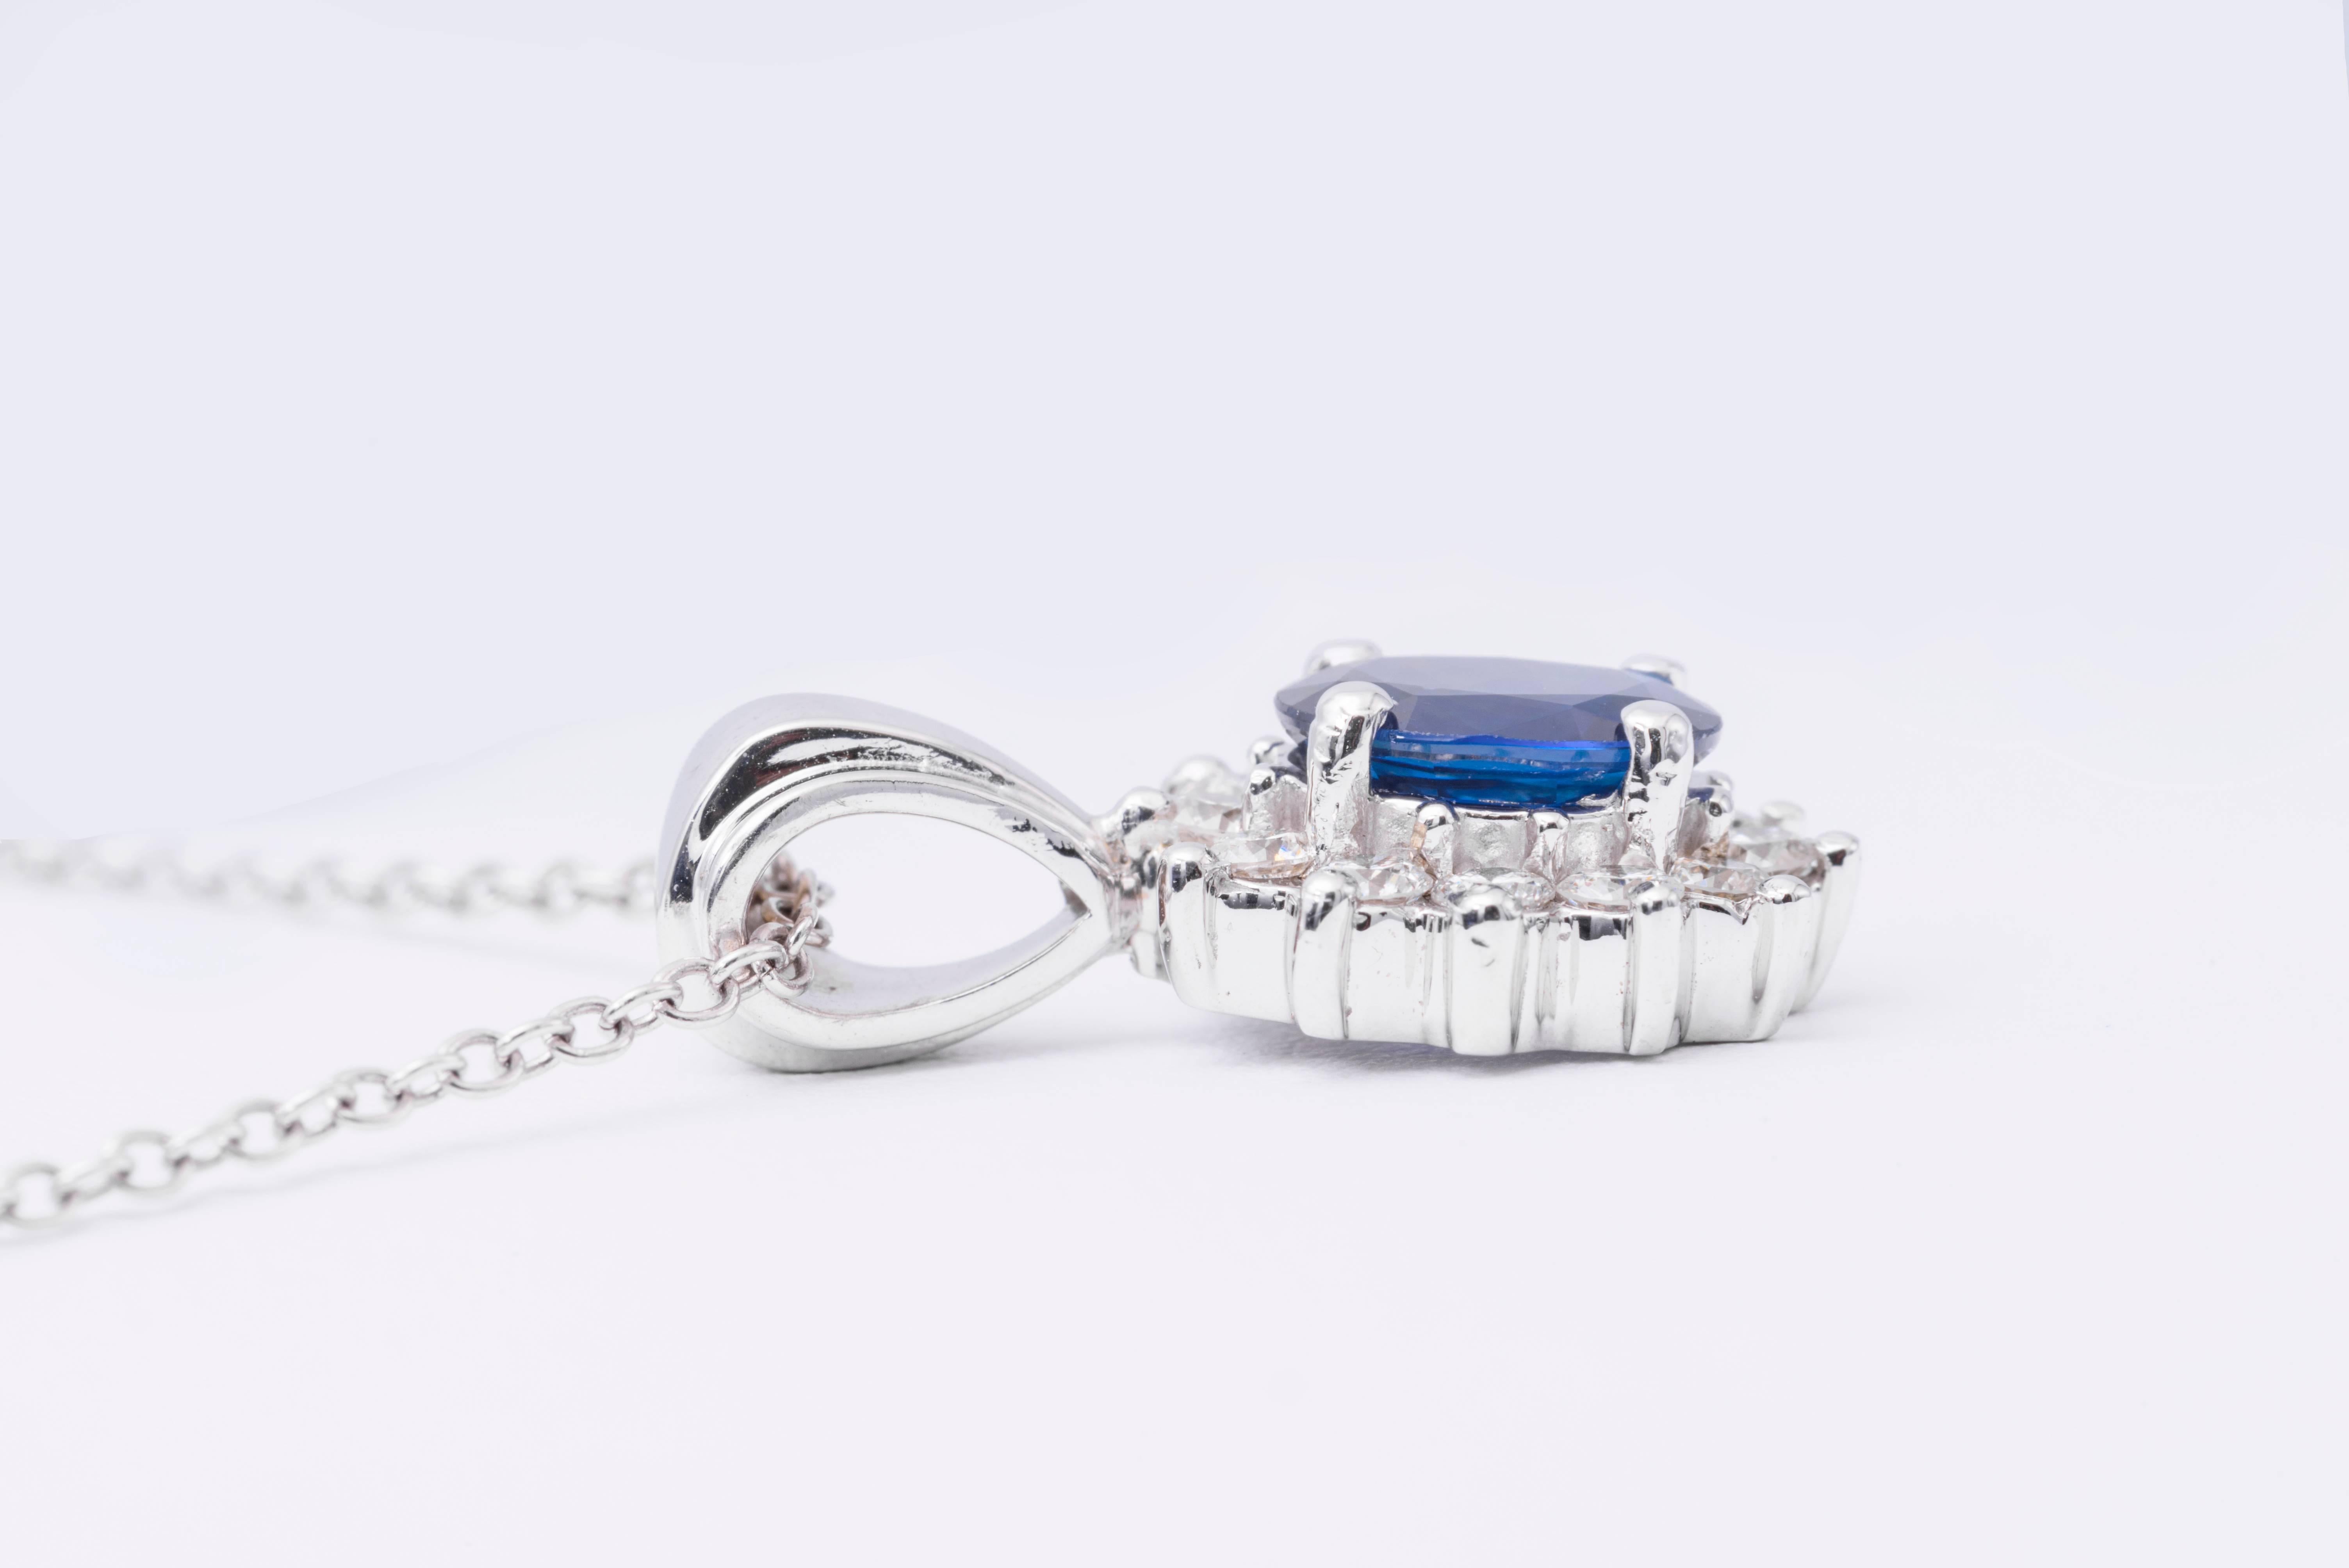 14K white gold with sapphire measuring 9 mm x 7 mm and weights 1.89 cts.
Diamonds: 0.70 cts.
pendant measures 24 x 13 mm